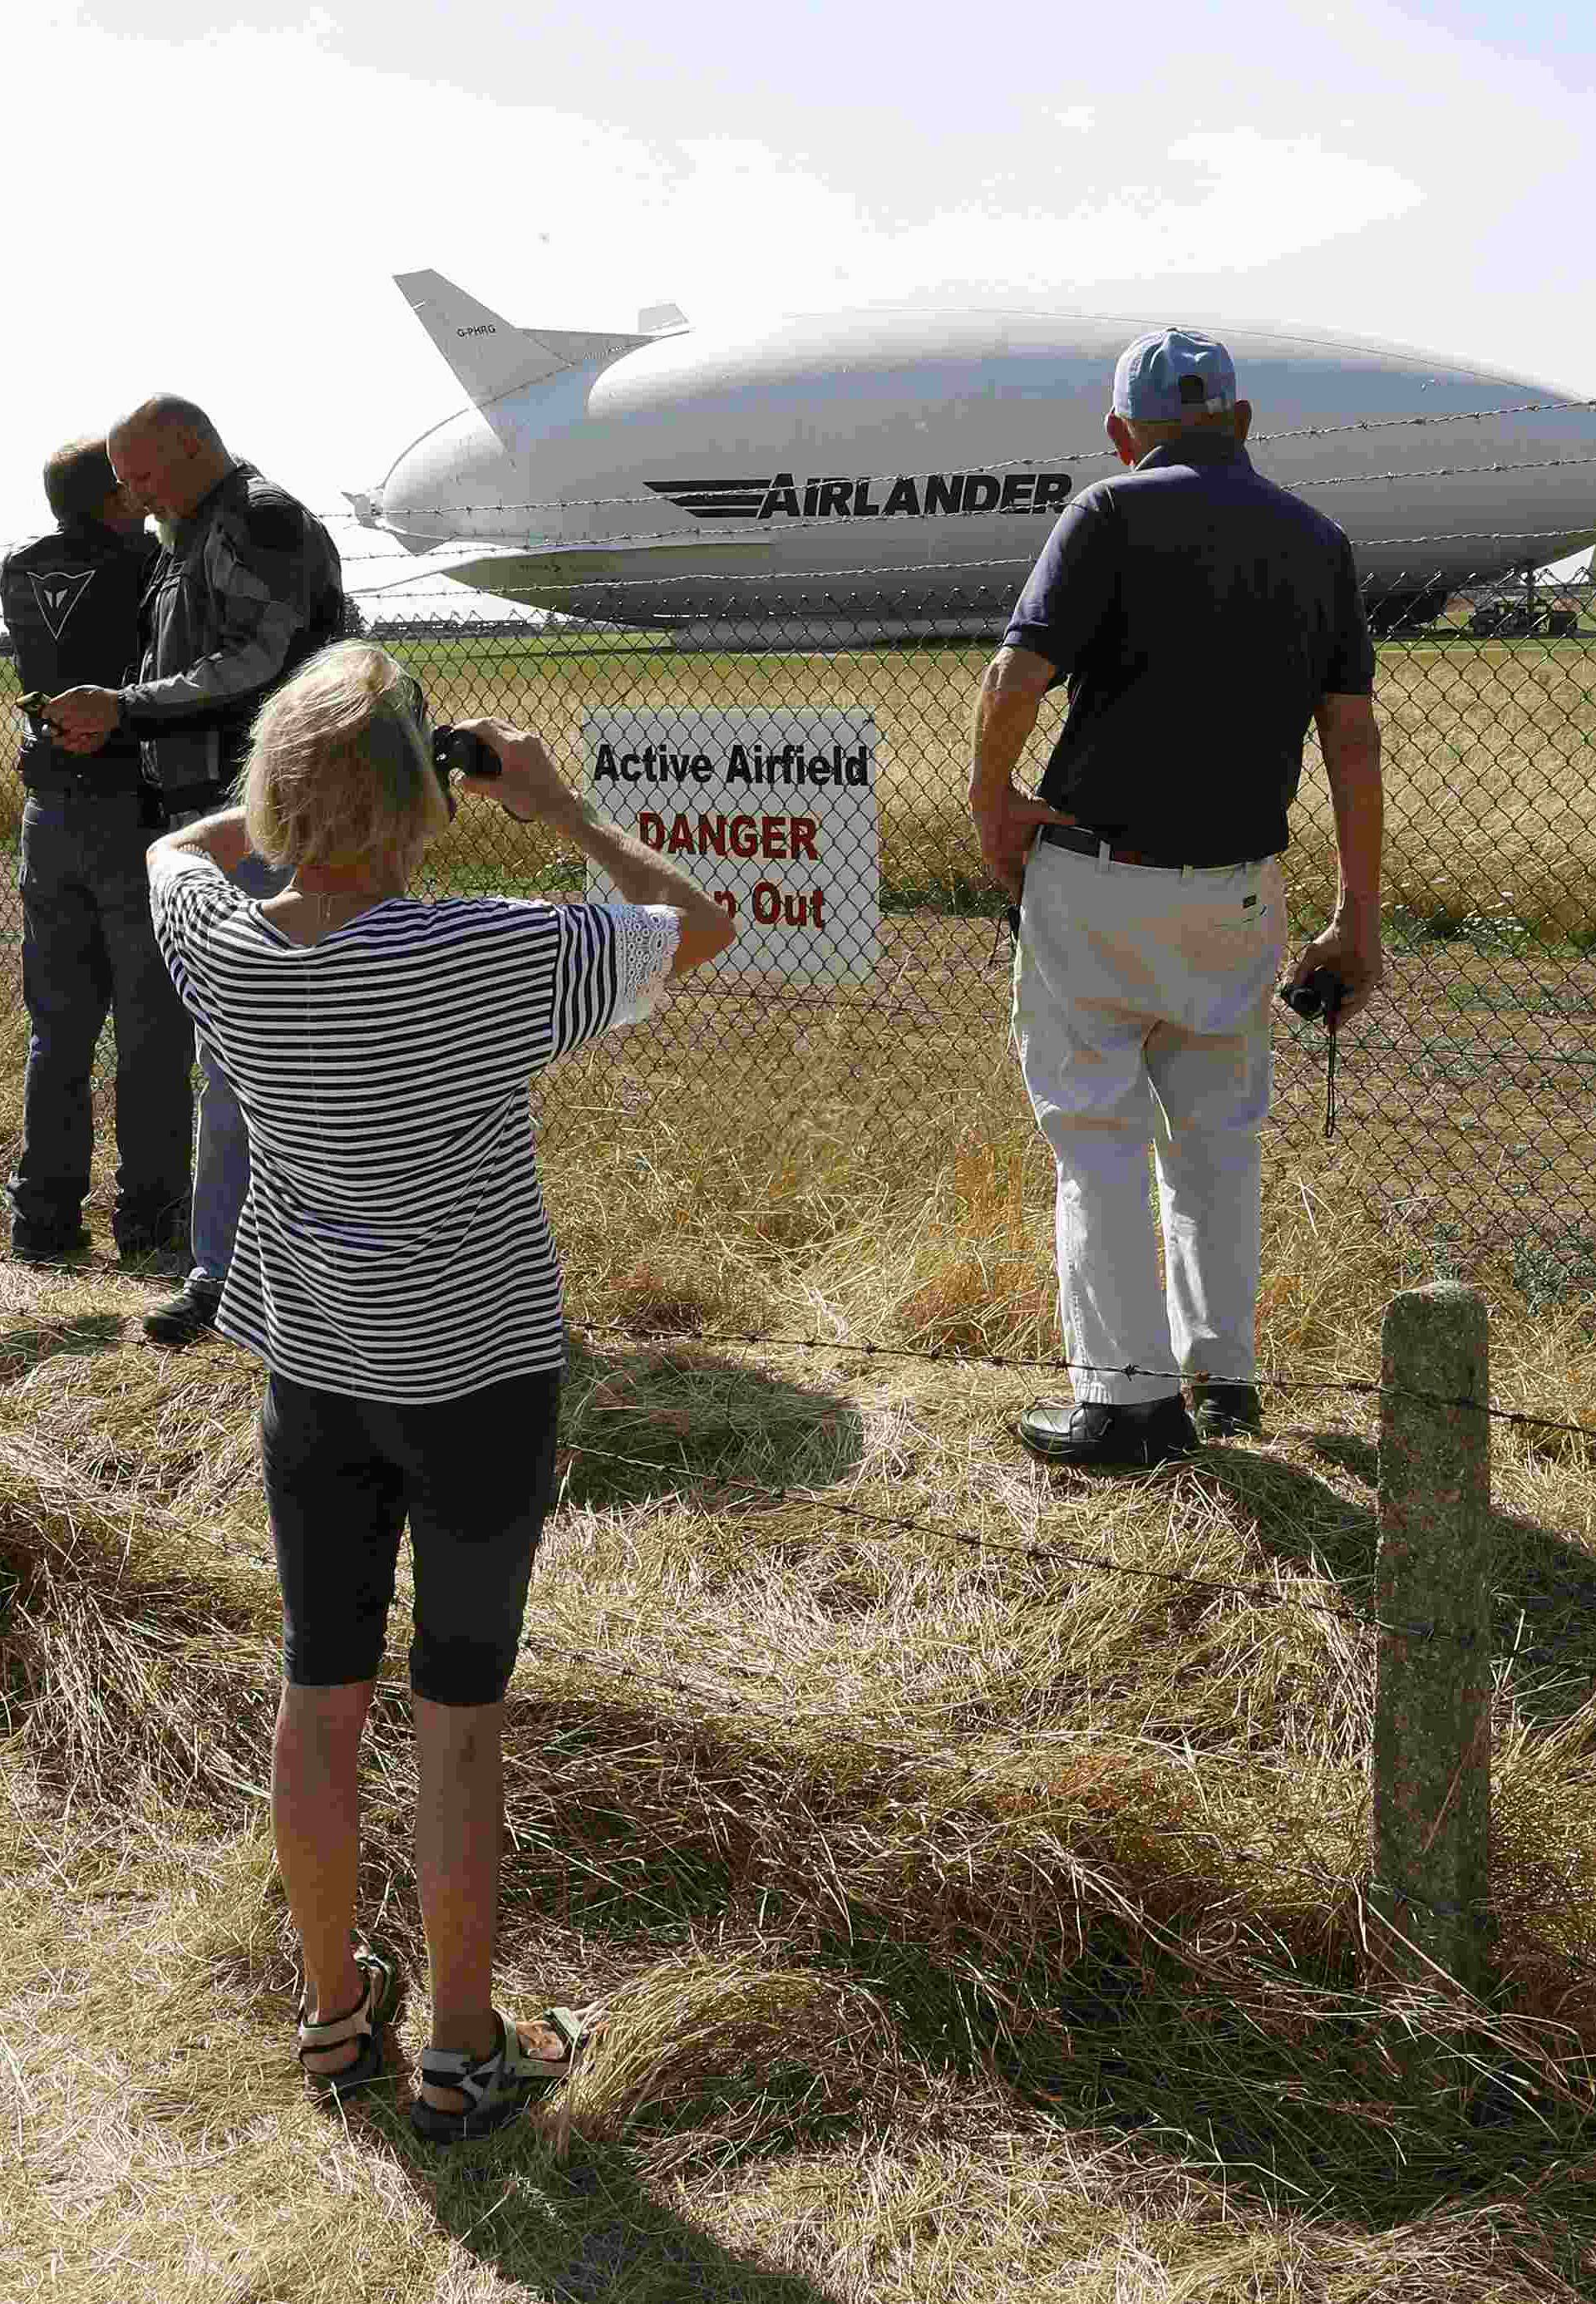 People look through the perimeter fence at the Airlander 10 hybrid airship following a crash-landing during a test flight at Cardington Airfield in Britain